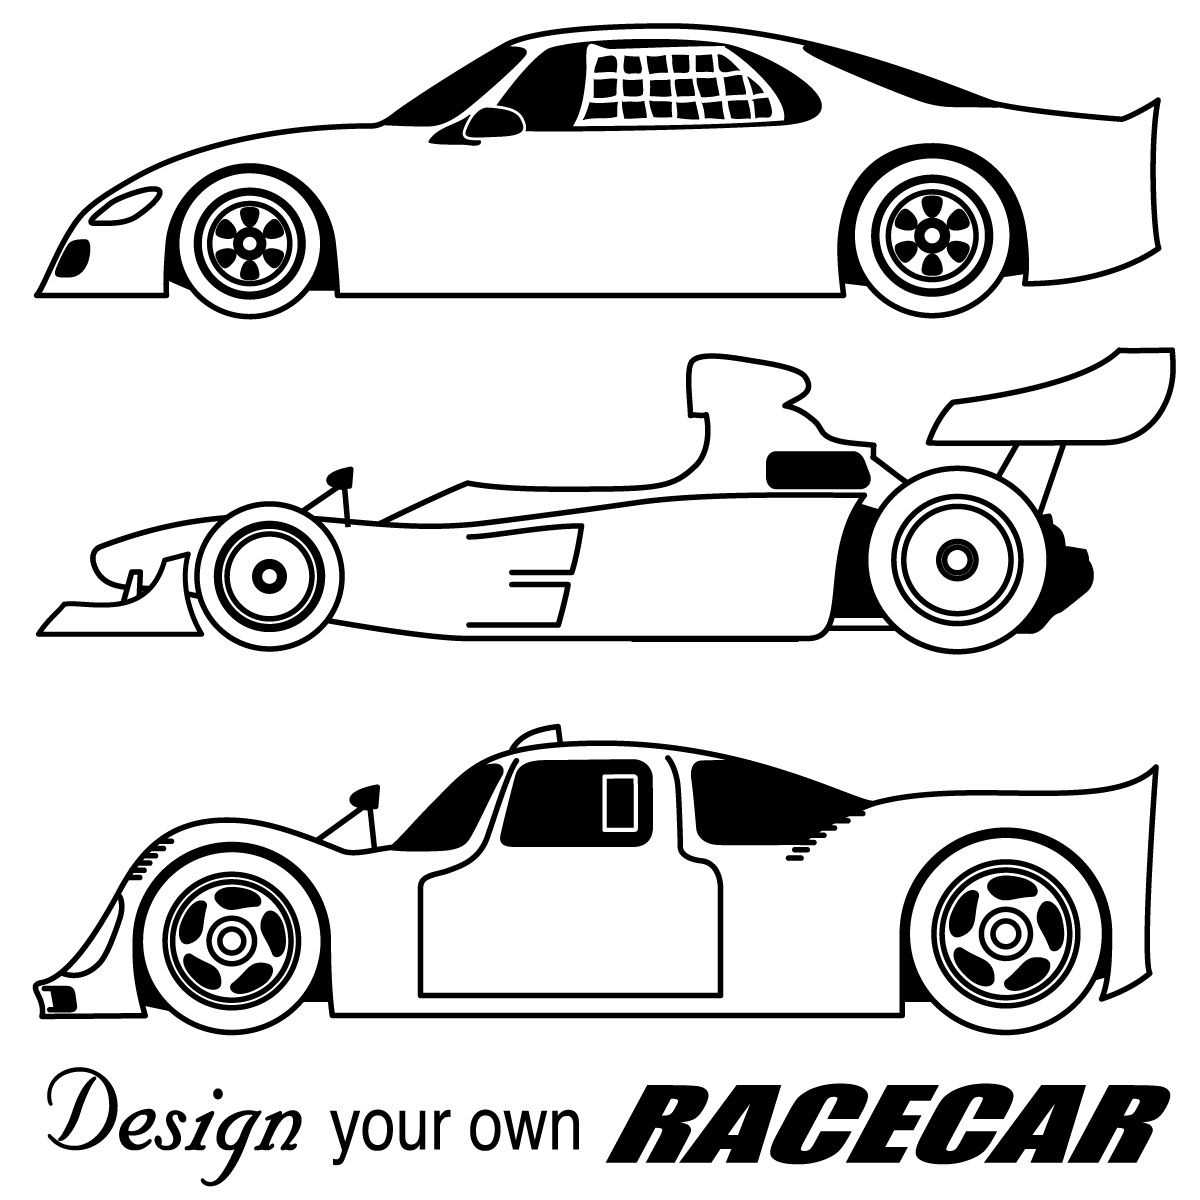 Blank Race Car Coloring Pages In Blank Race Car Templates